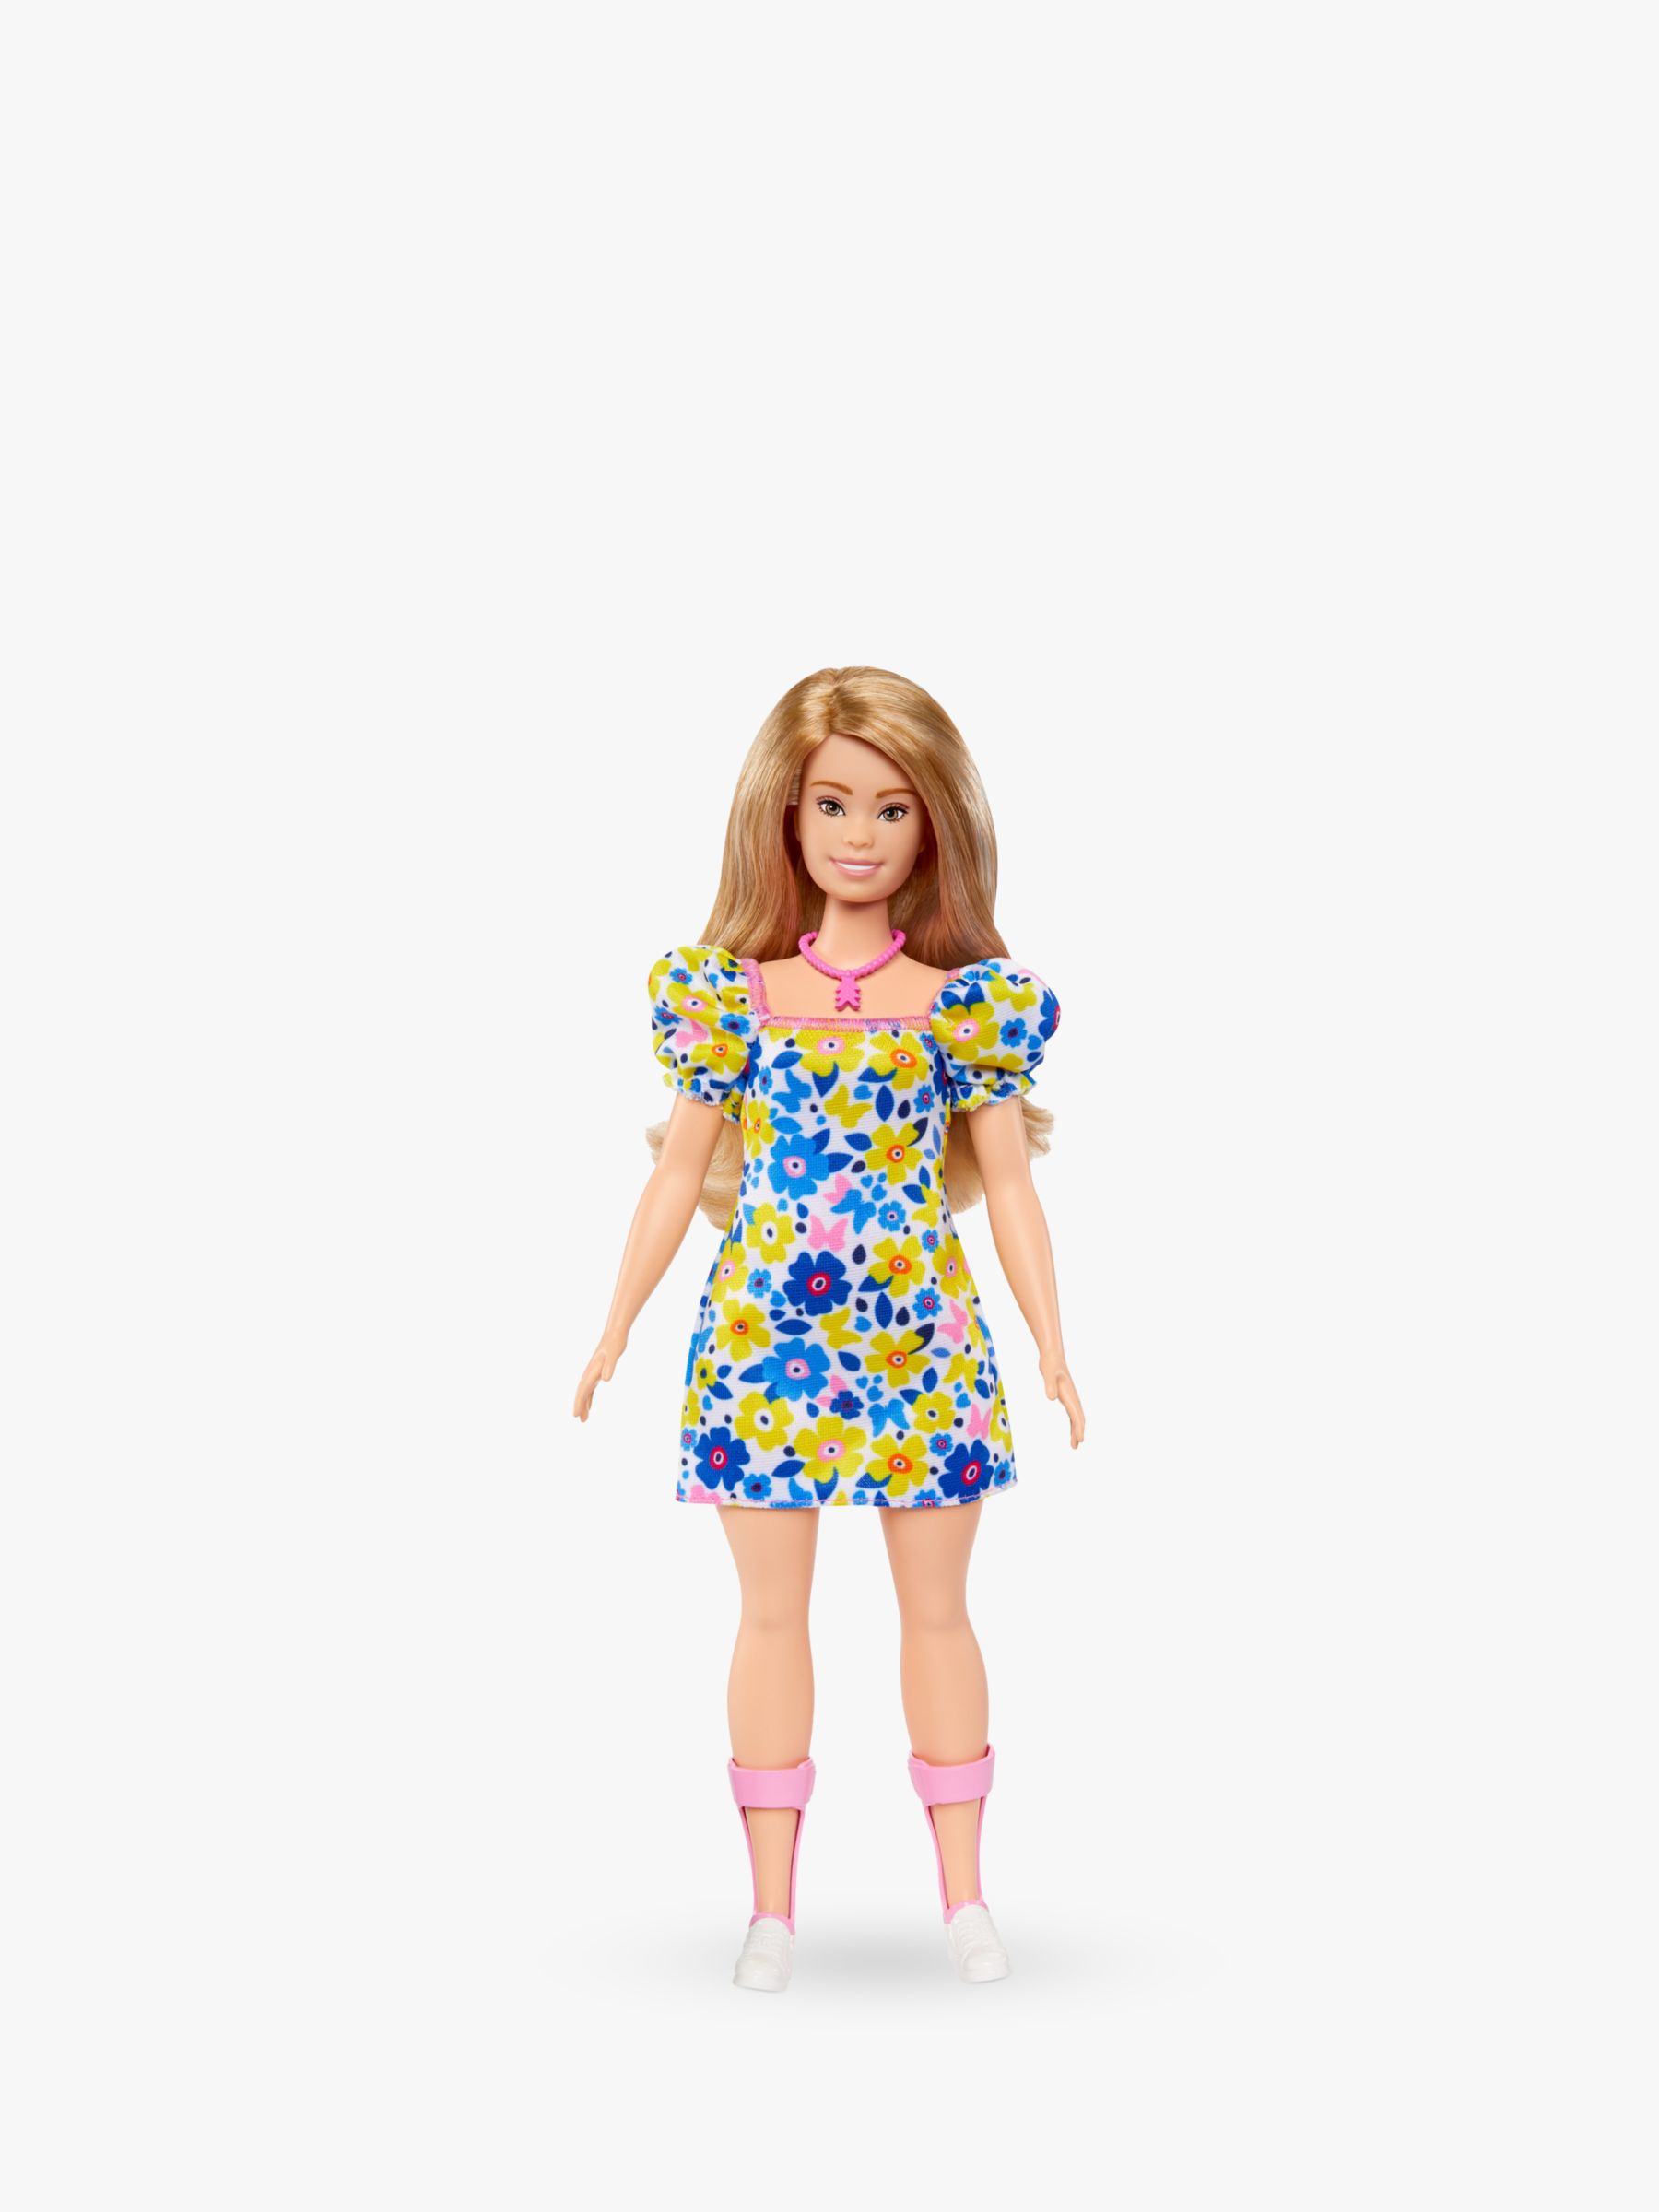 Barbie Fashionistas Doll with Down Syndrome